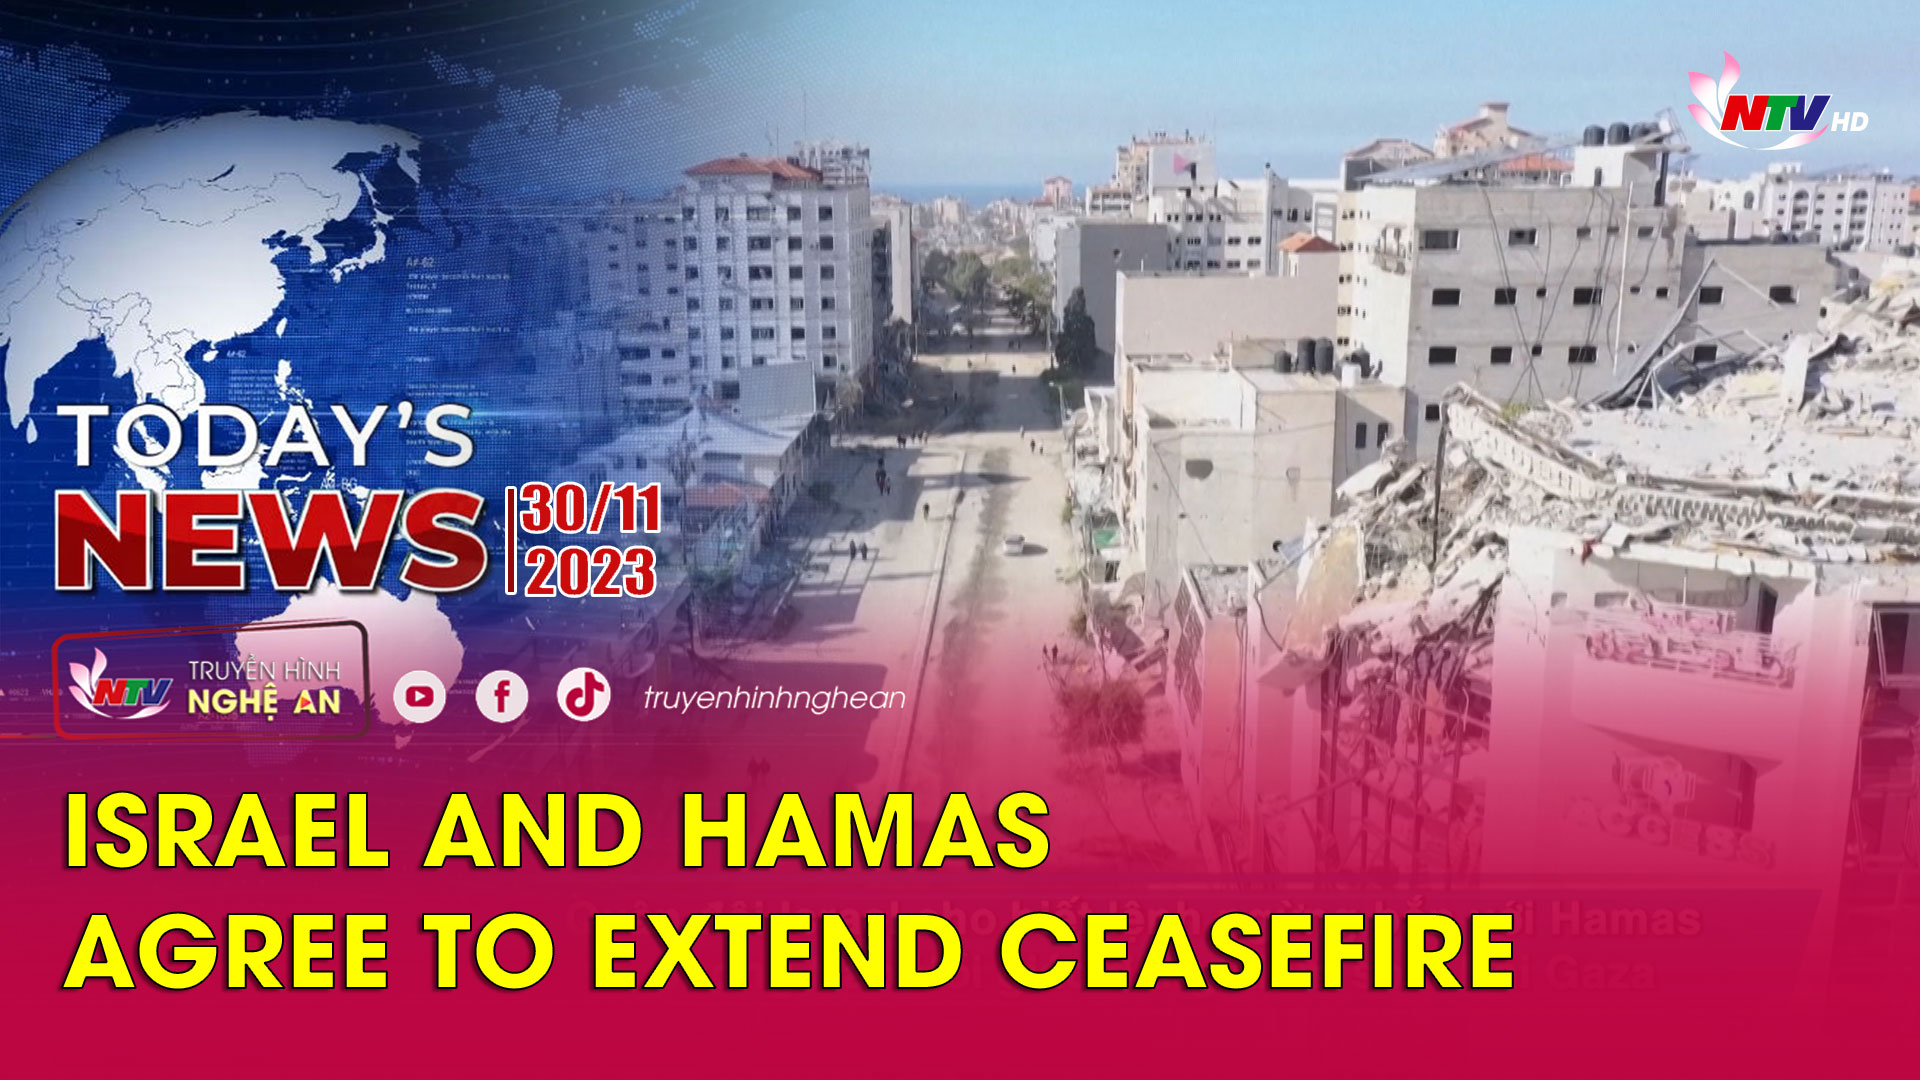 Today's News - 30/11/2023: Israel and Hamas agree to extend ceasefire